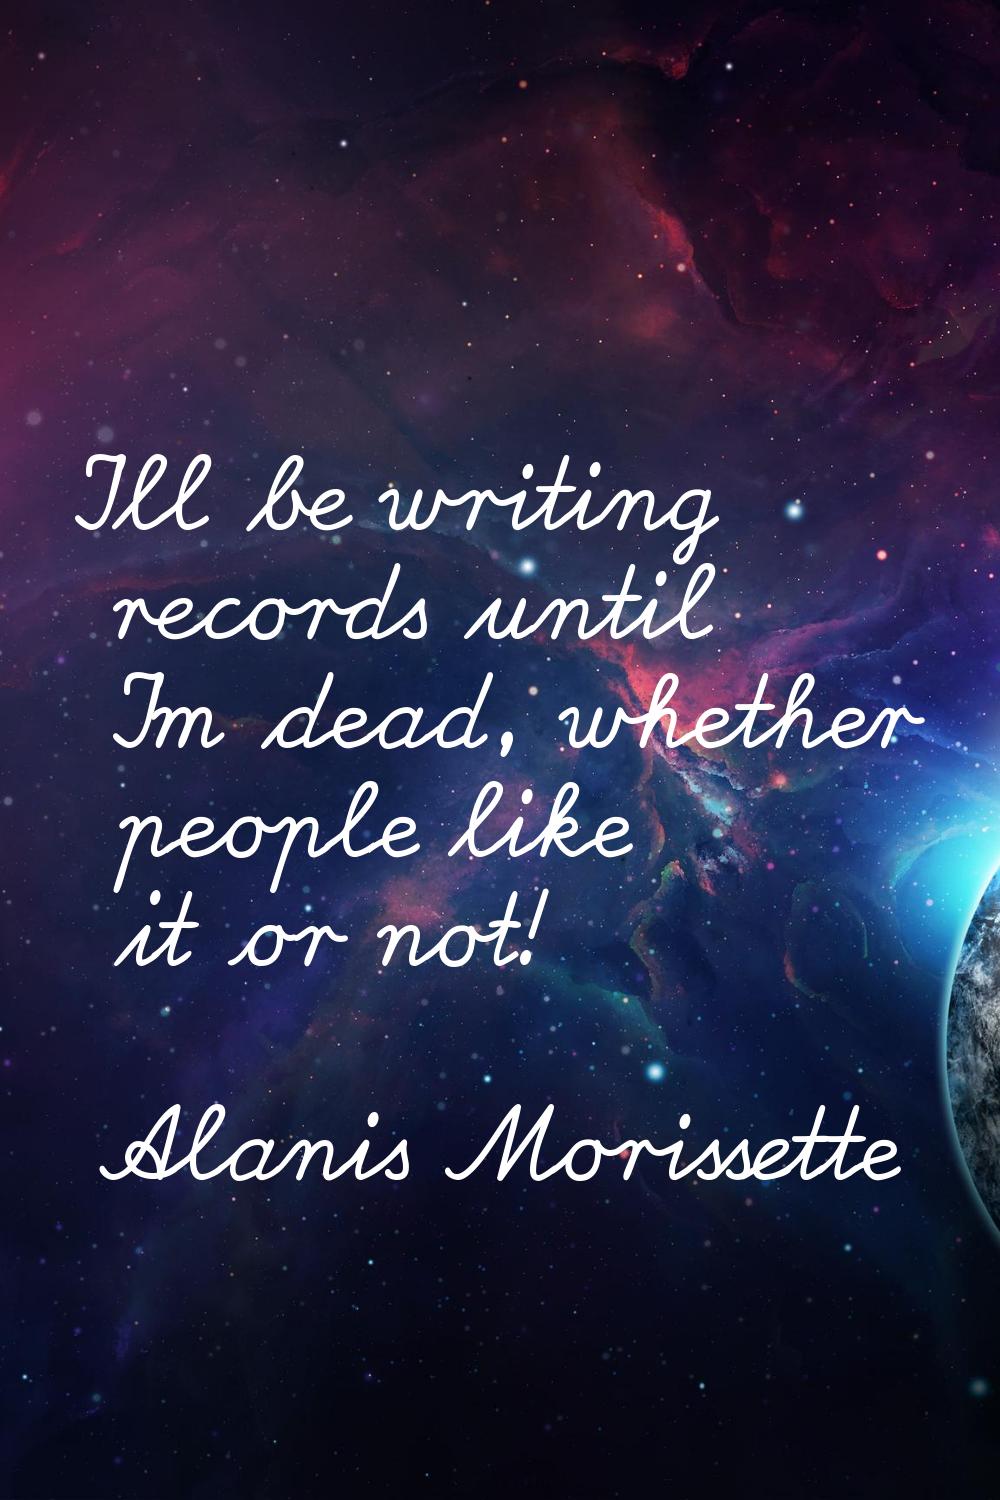 I'll be writing records until I'm dead, whether people like it or not!